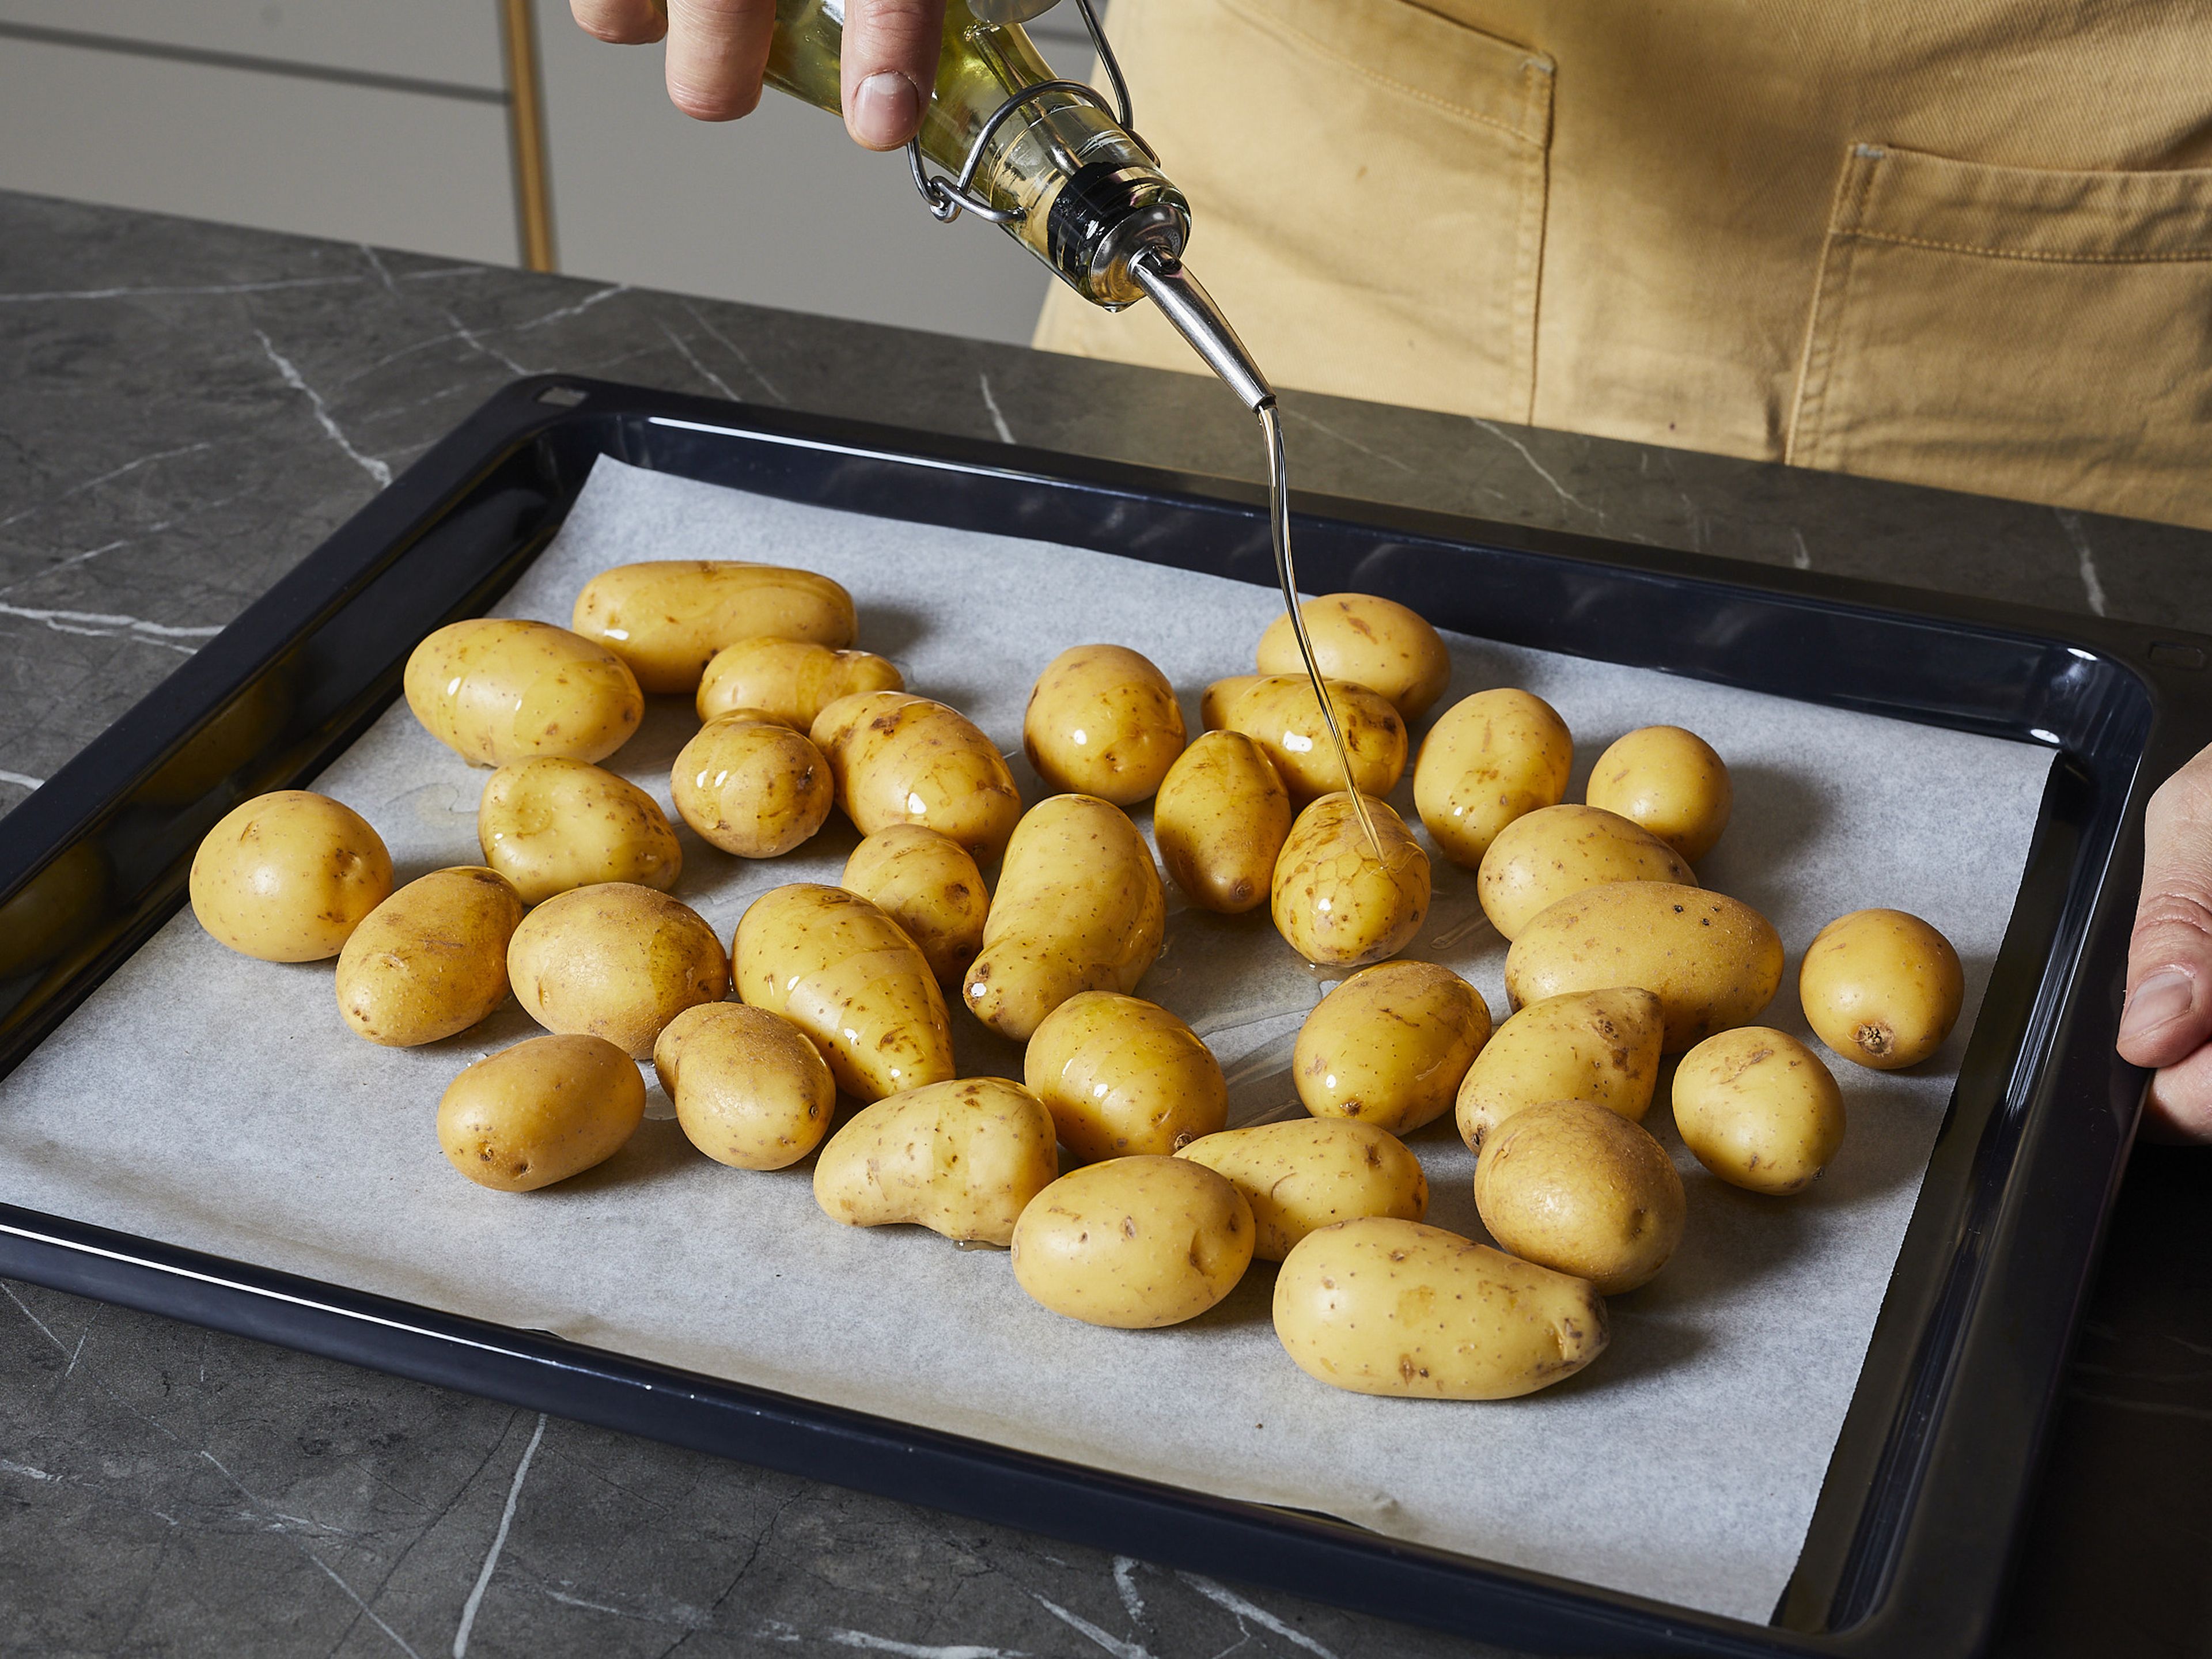 Spread washed potatoes whole on a baking tray covered with baking paper and mix with ¼ of the olive oil, salt and pepper. Place the potato tray in the oven and bake for 25–30 min. until golden brown. Meanwhile continue with the recipe.